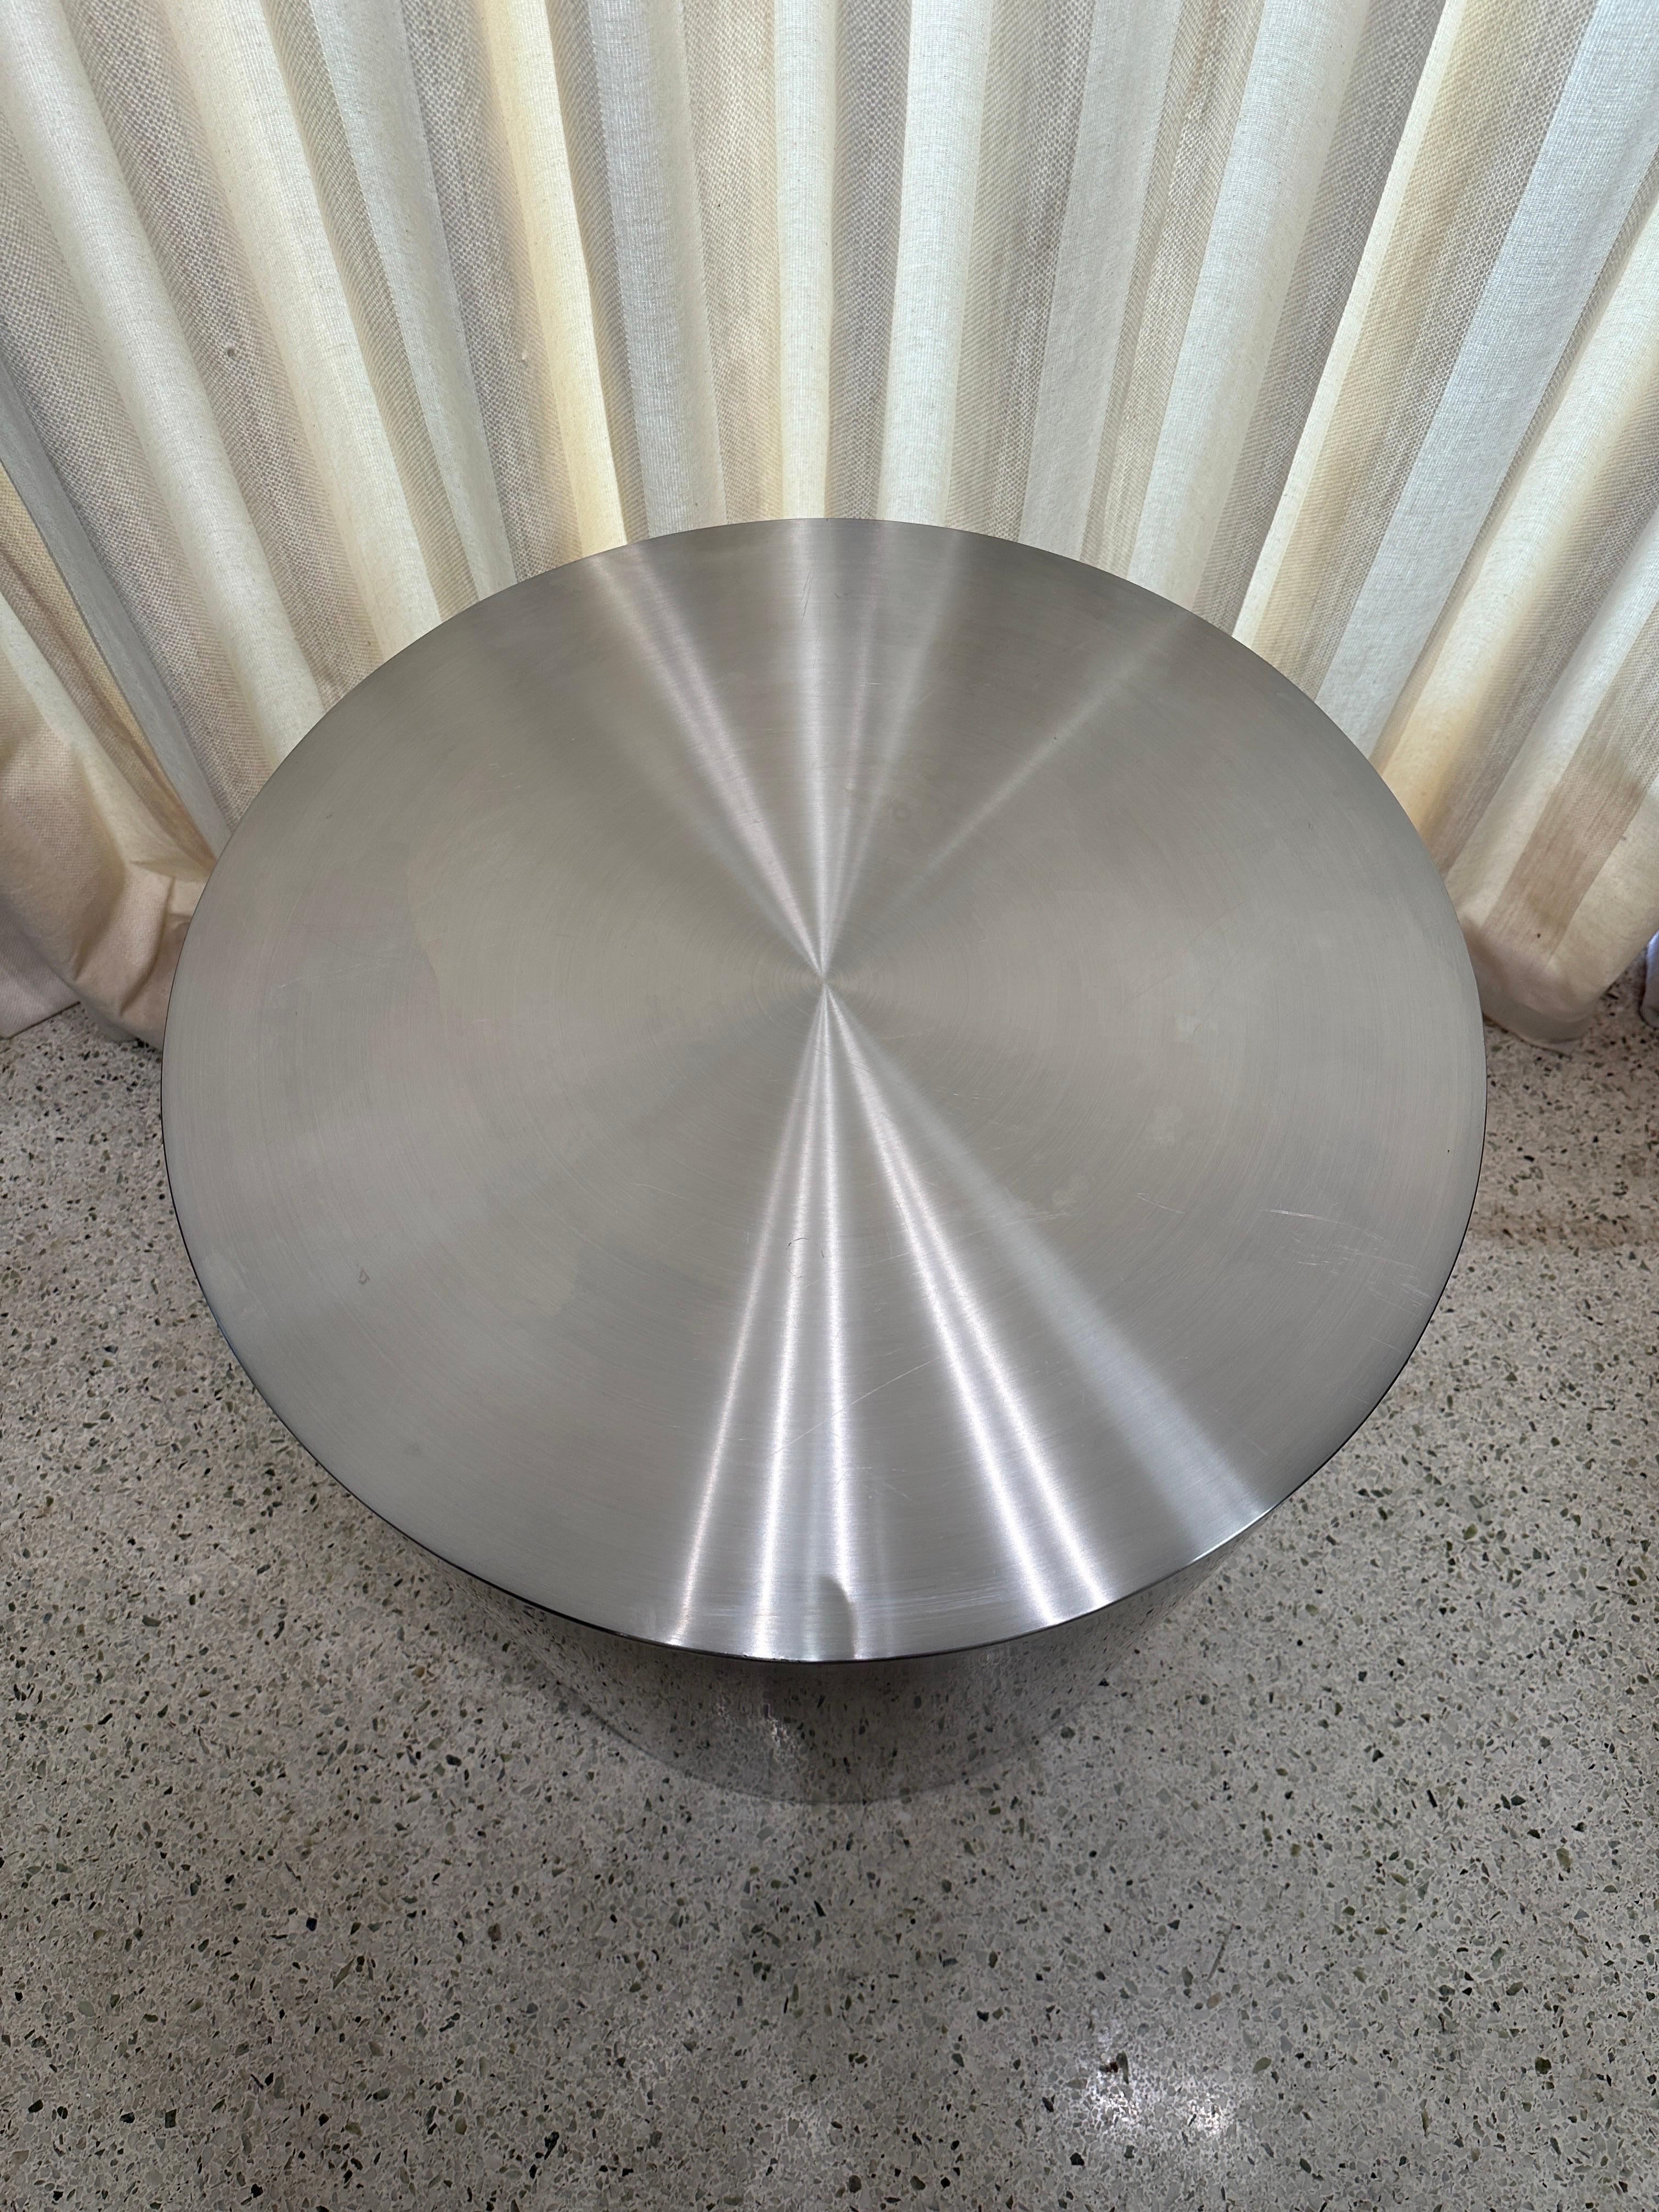 This amazing brushed stainless steel column/ pedestal base which can also be used as a dining table base by adding a custom thick round glass.  The beautiful finish is modern and industrial with minimal wear to top (minor scratches).  Style of Maria